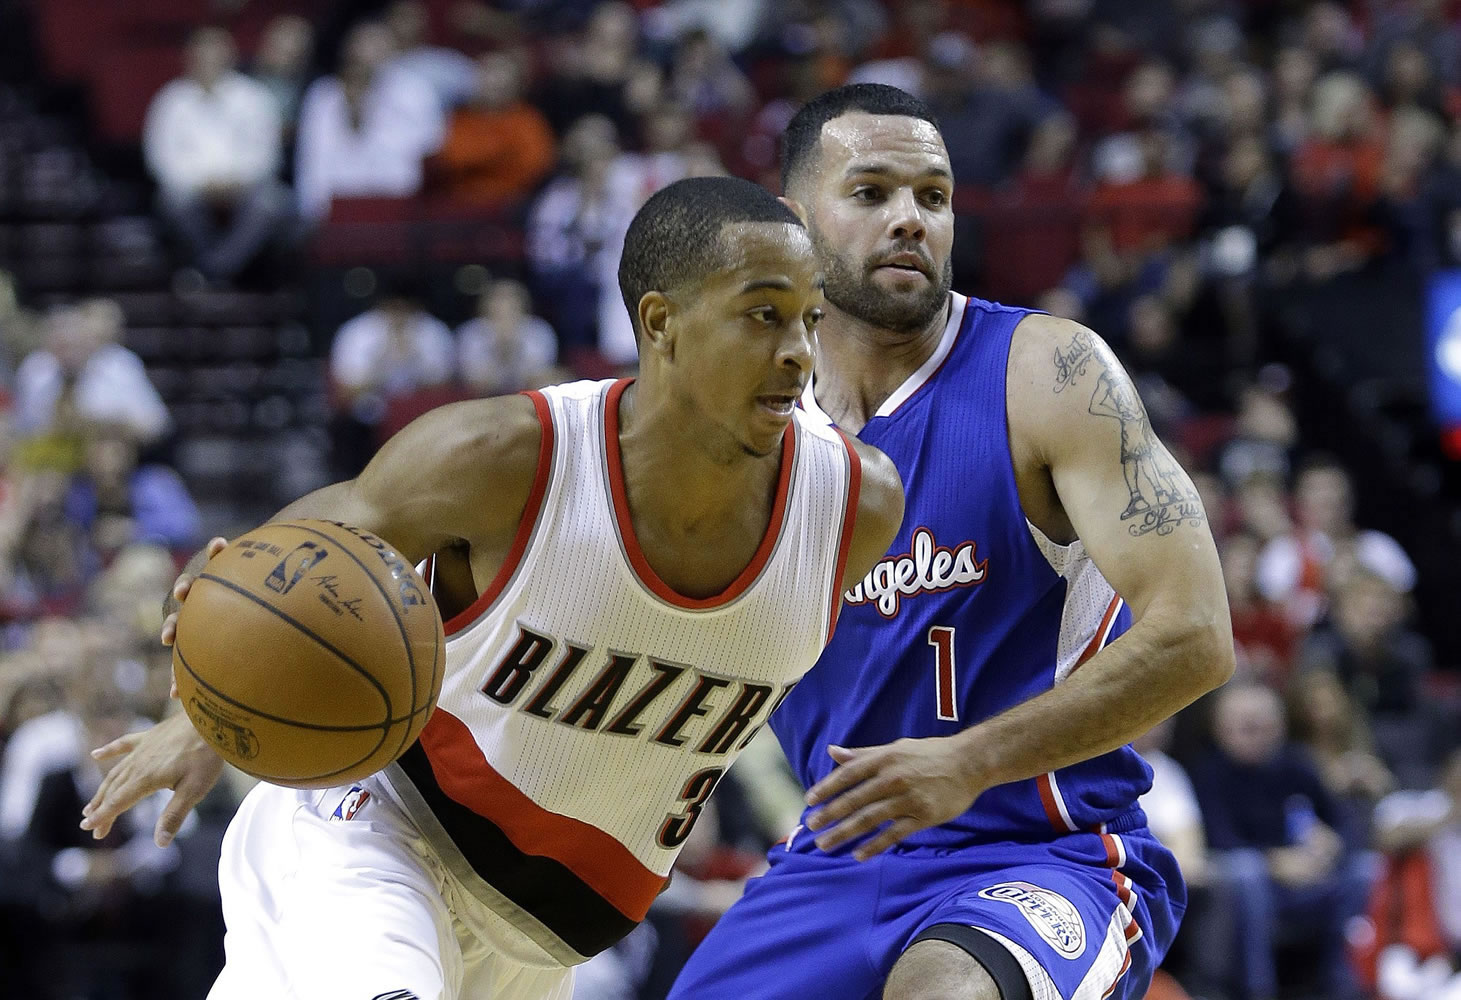 Portland Trail Blazers guard CJ McCollum, left, drives past Los Angeles Clippers guard J.J. Redick during the second half of an NBA pre-season basketball game in Portland, Ore., Sunday, Oct. 12, 2014.